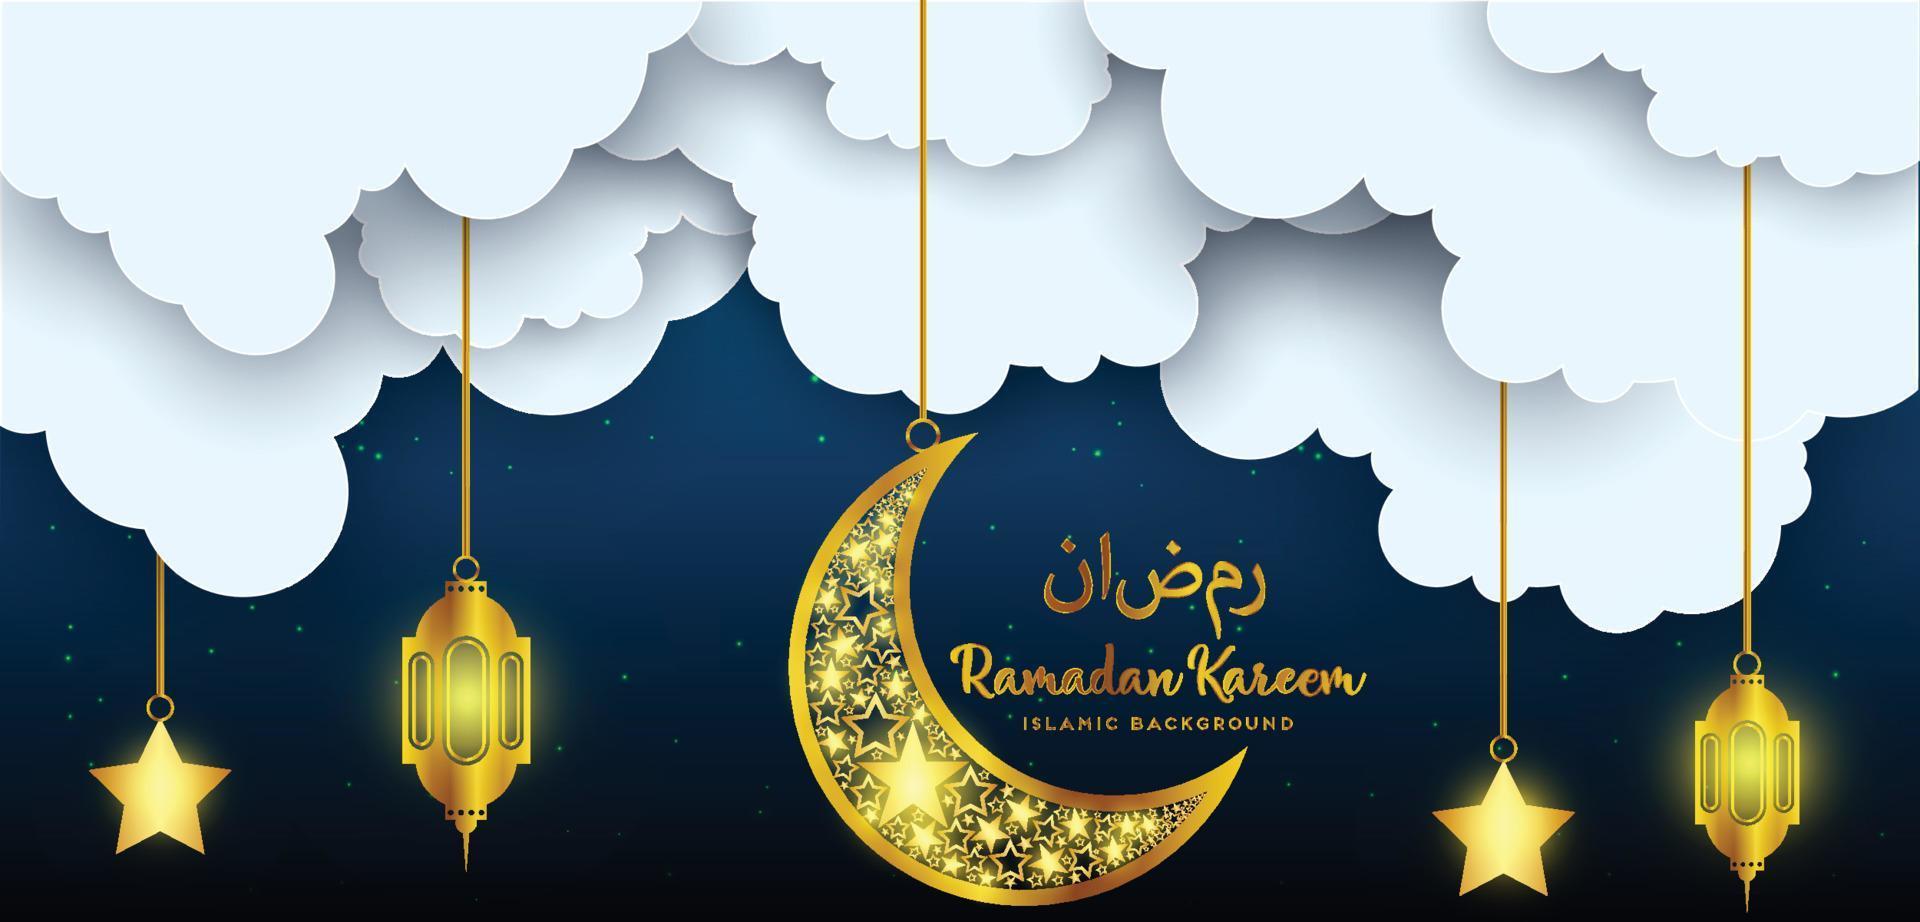 Ramadan Kareem greeting with mosque and hand drawn calligraphy lettering which means ''Ramadan kareem'' on night cloudy background. Editable Vector illustration.